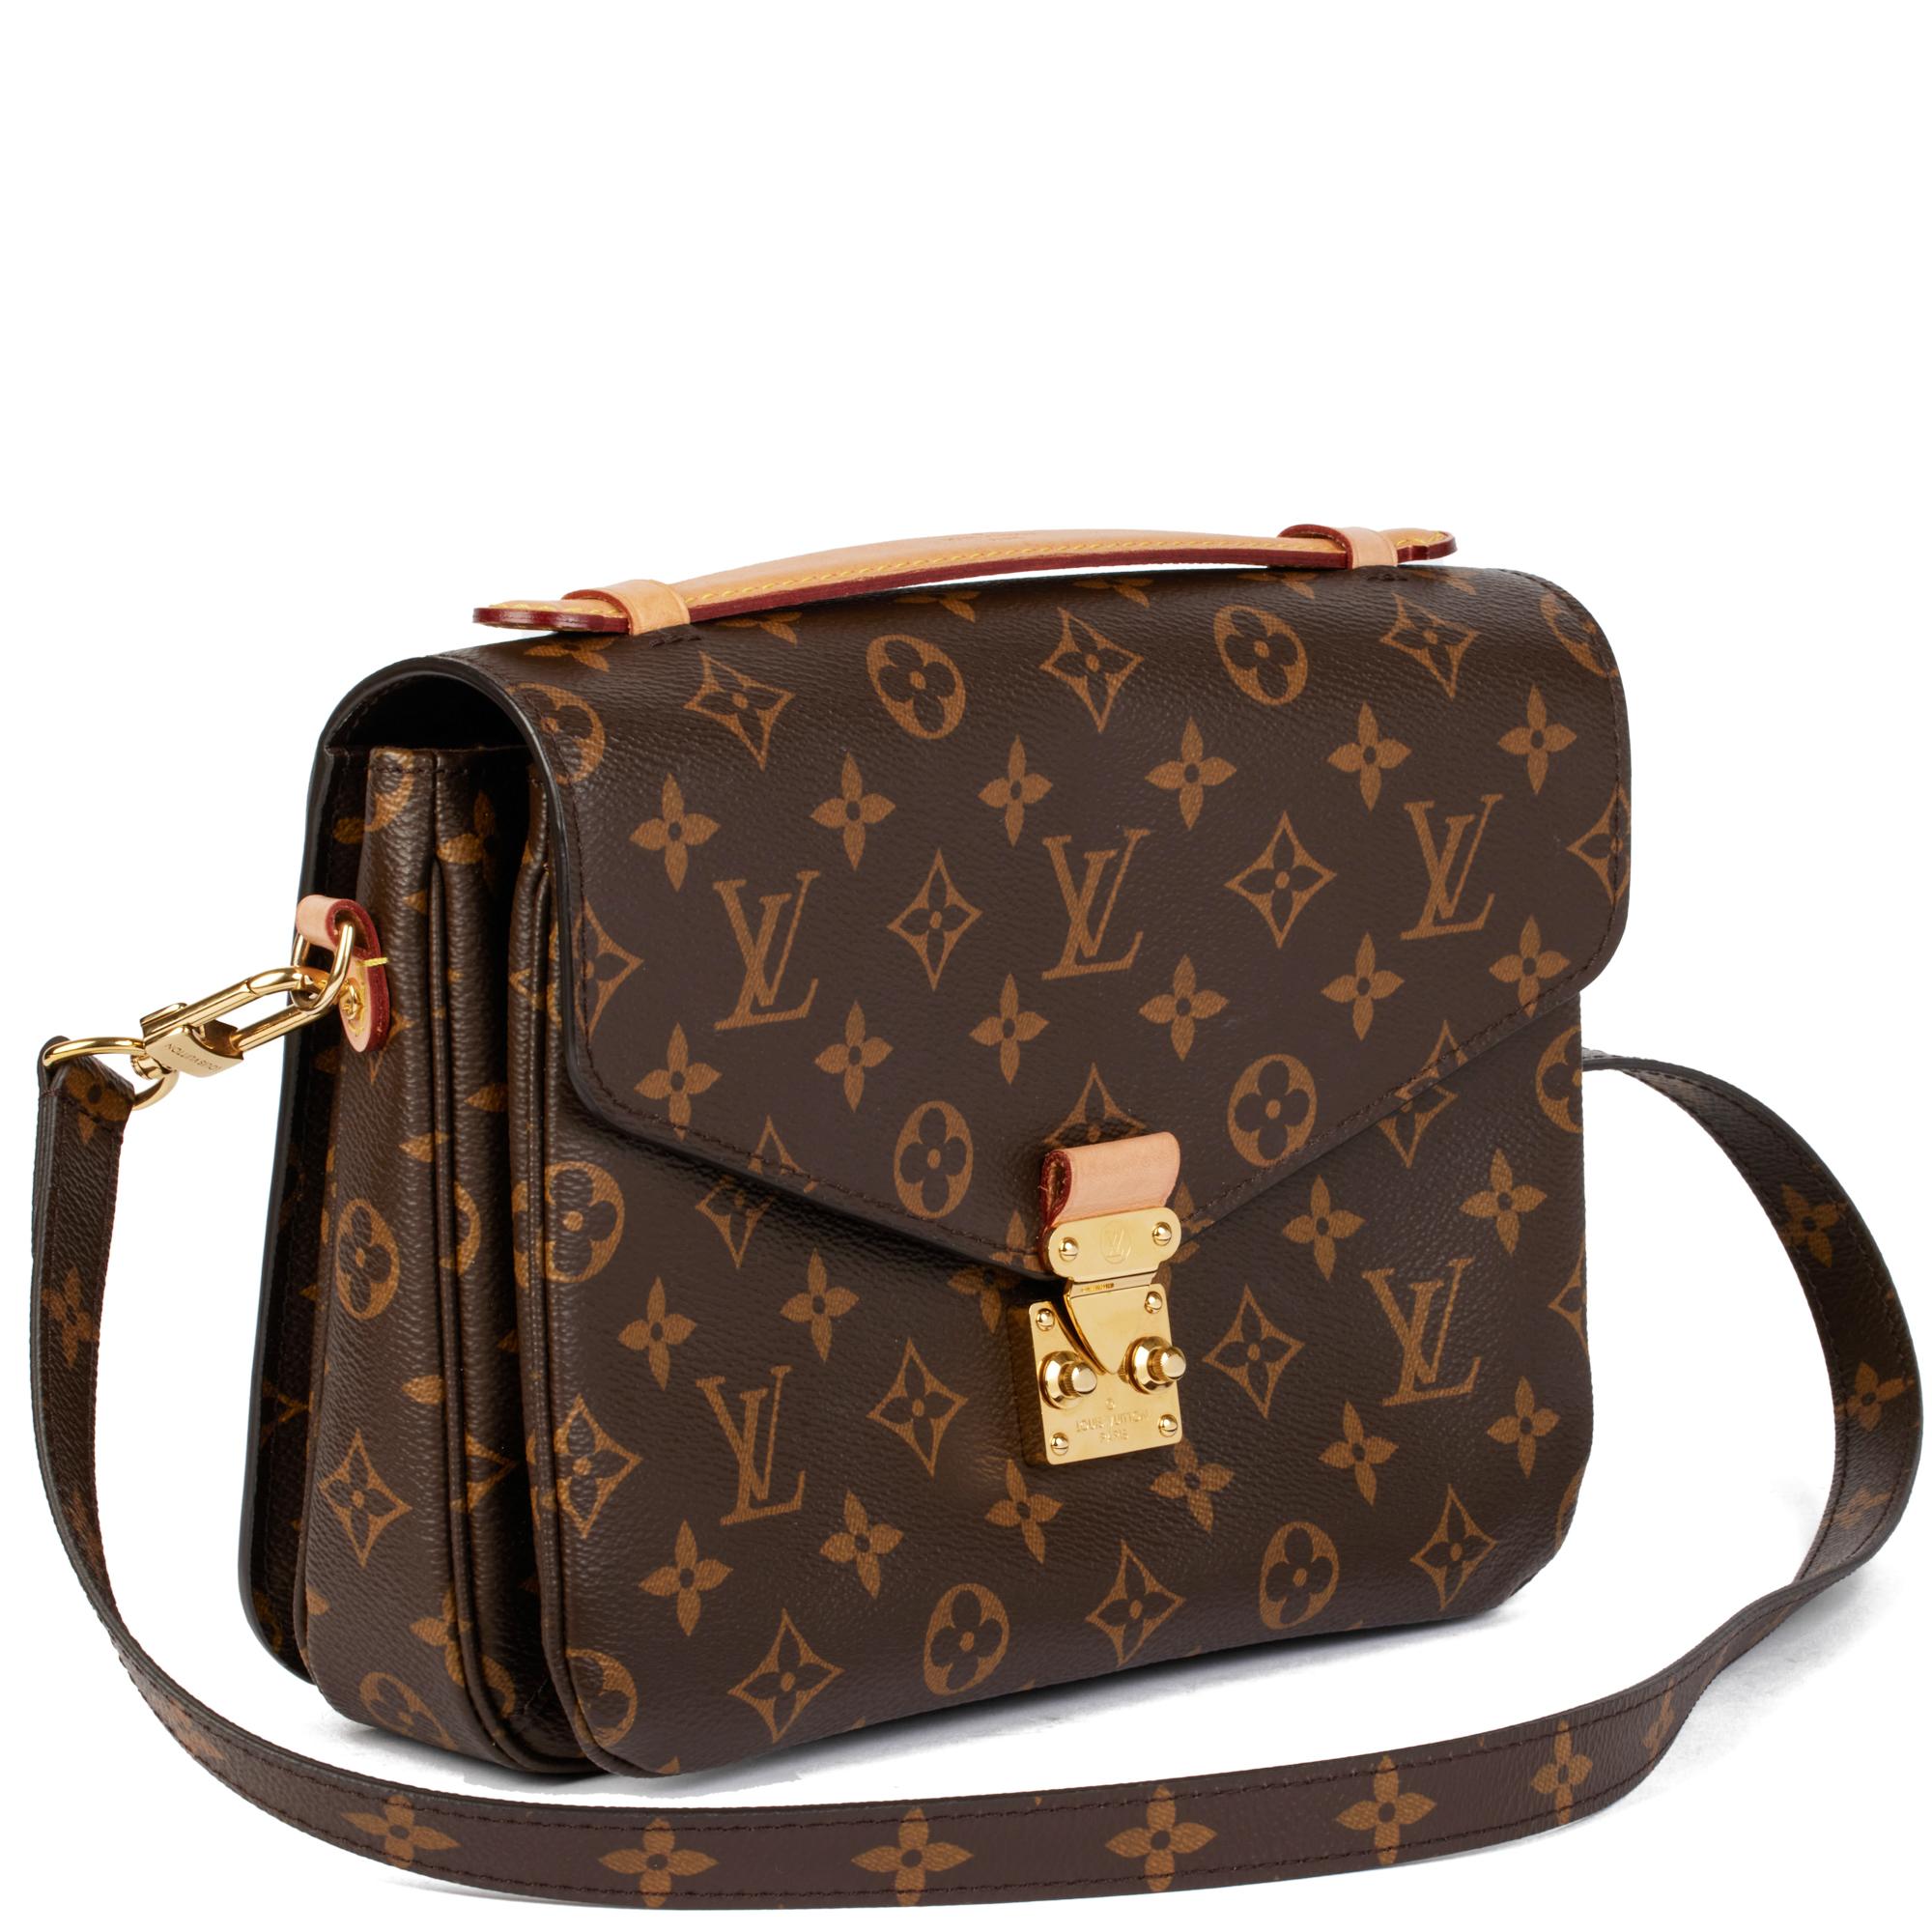 LOUIS VUITTON
Brown Monogram Coated Canvas Pochette Metis

Serial Number: DR1169
Age (Circa): 2019
Accompanied By: Louis Vuitton Dust Bag, Box, Harrods Receipt & Louis Vuitton Receipt
Authenticity Details: Date Stamp (Made in France) 
Gender: